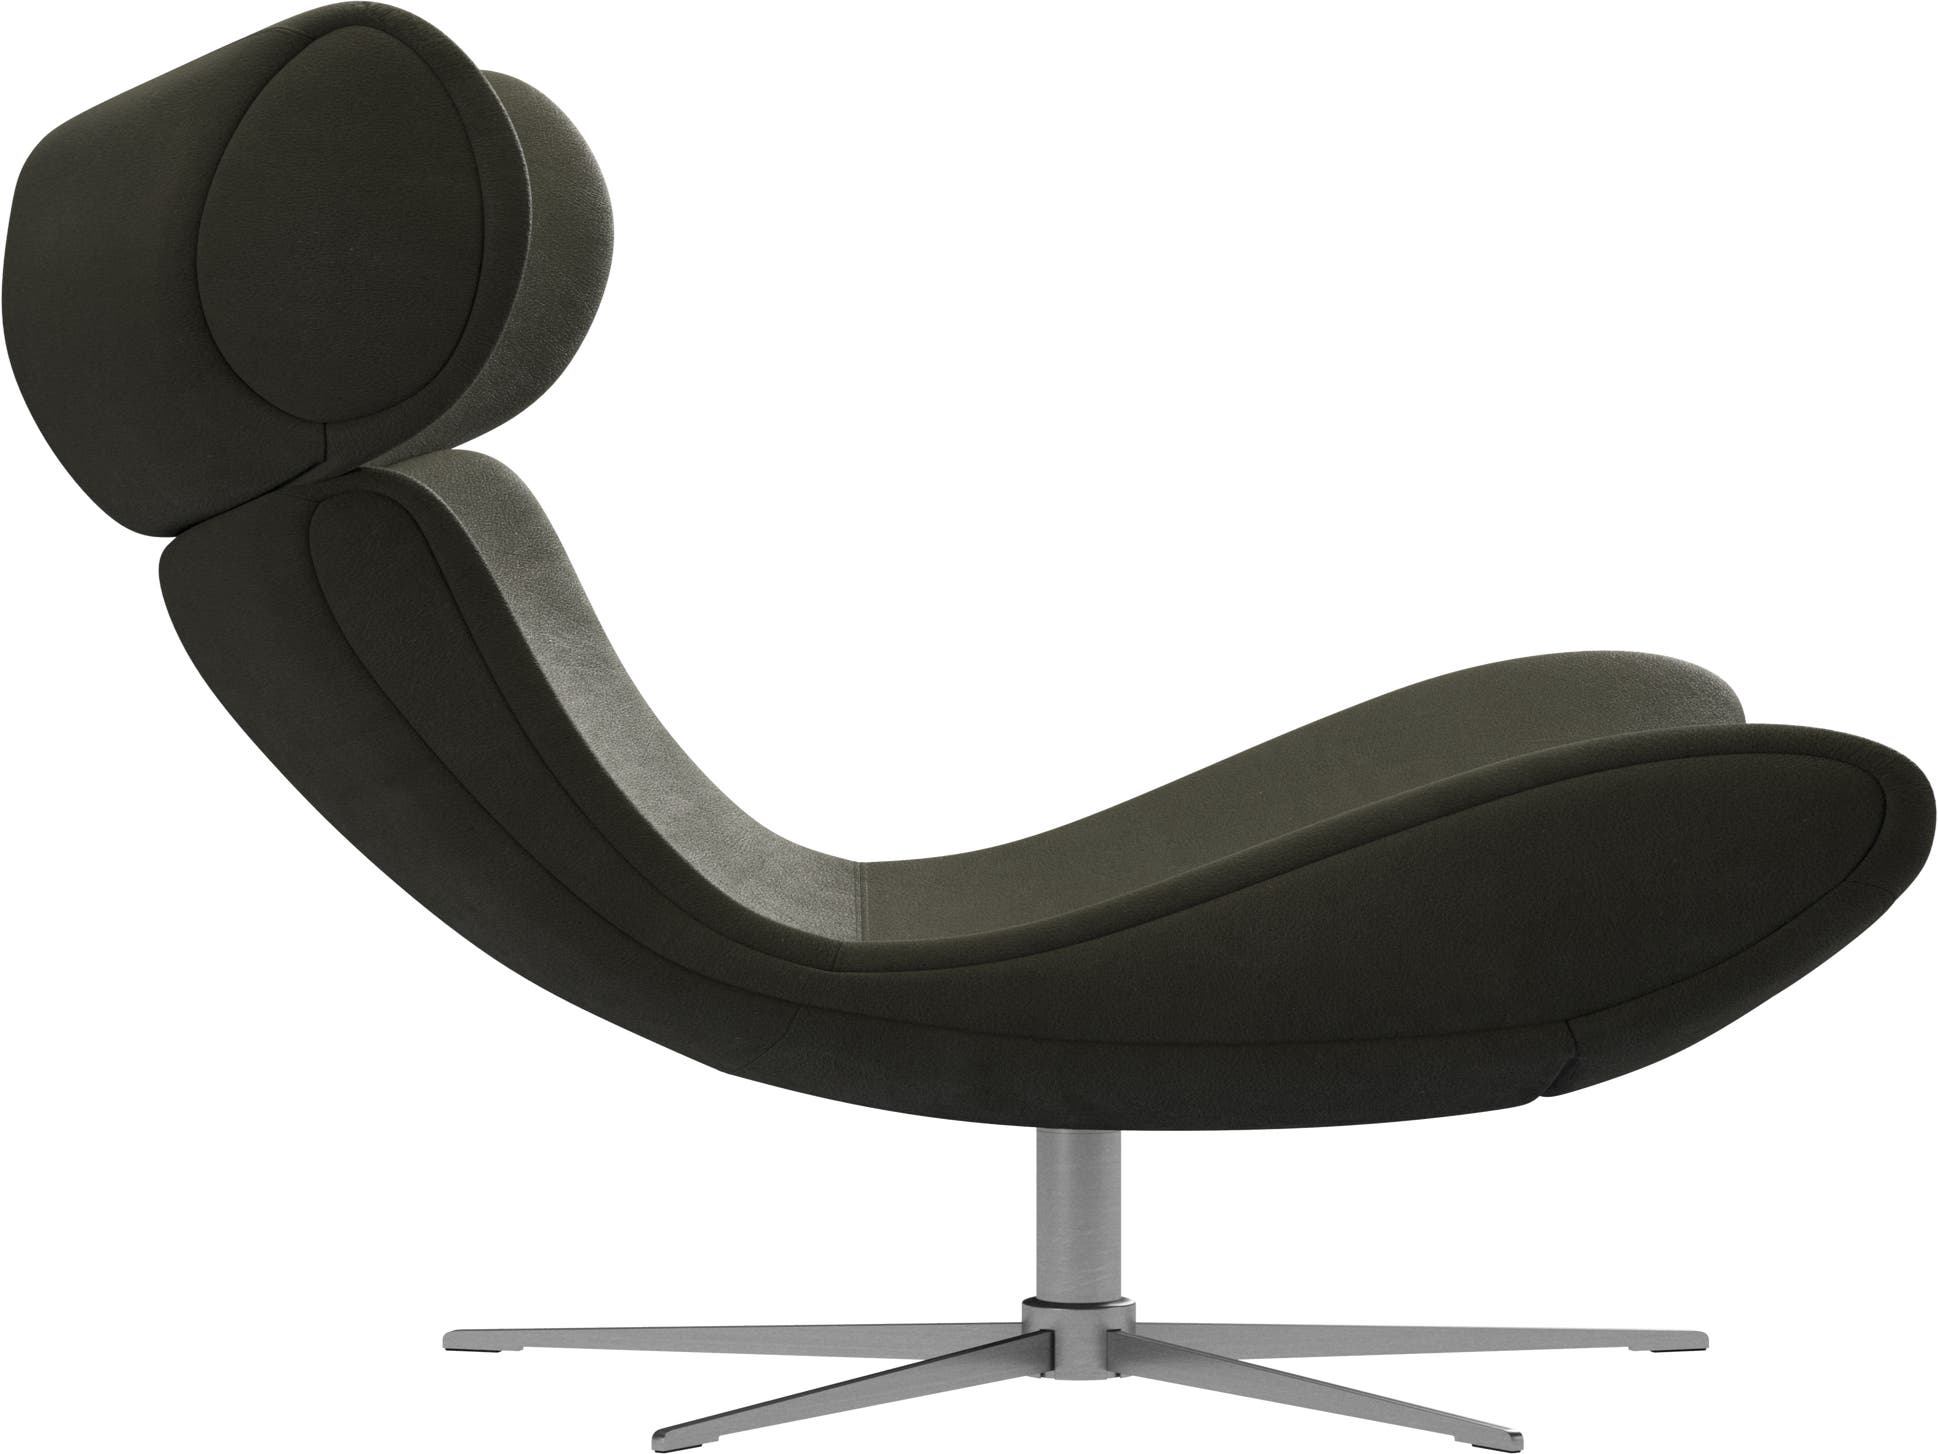 Imola chair with swivel function | BoConcept